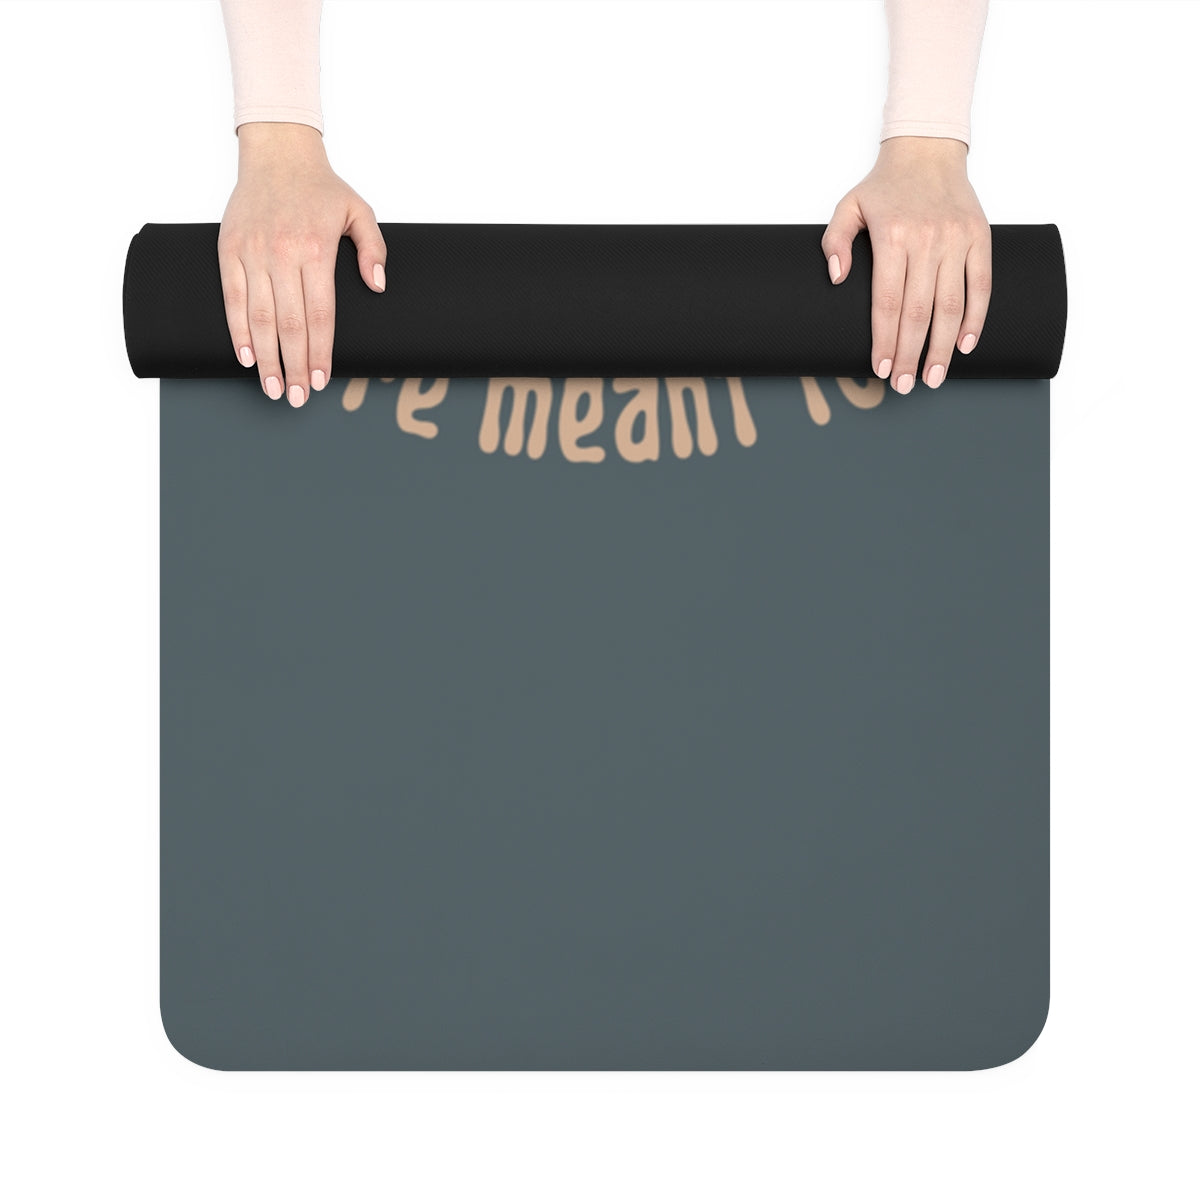 Where You're Meant To Be Rubber Yoga Mat